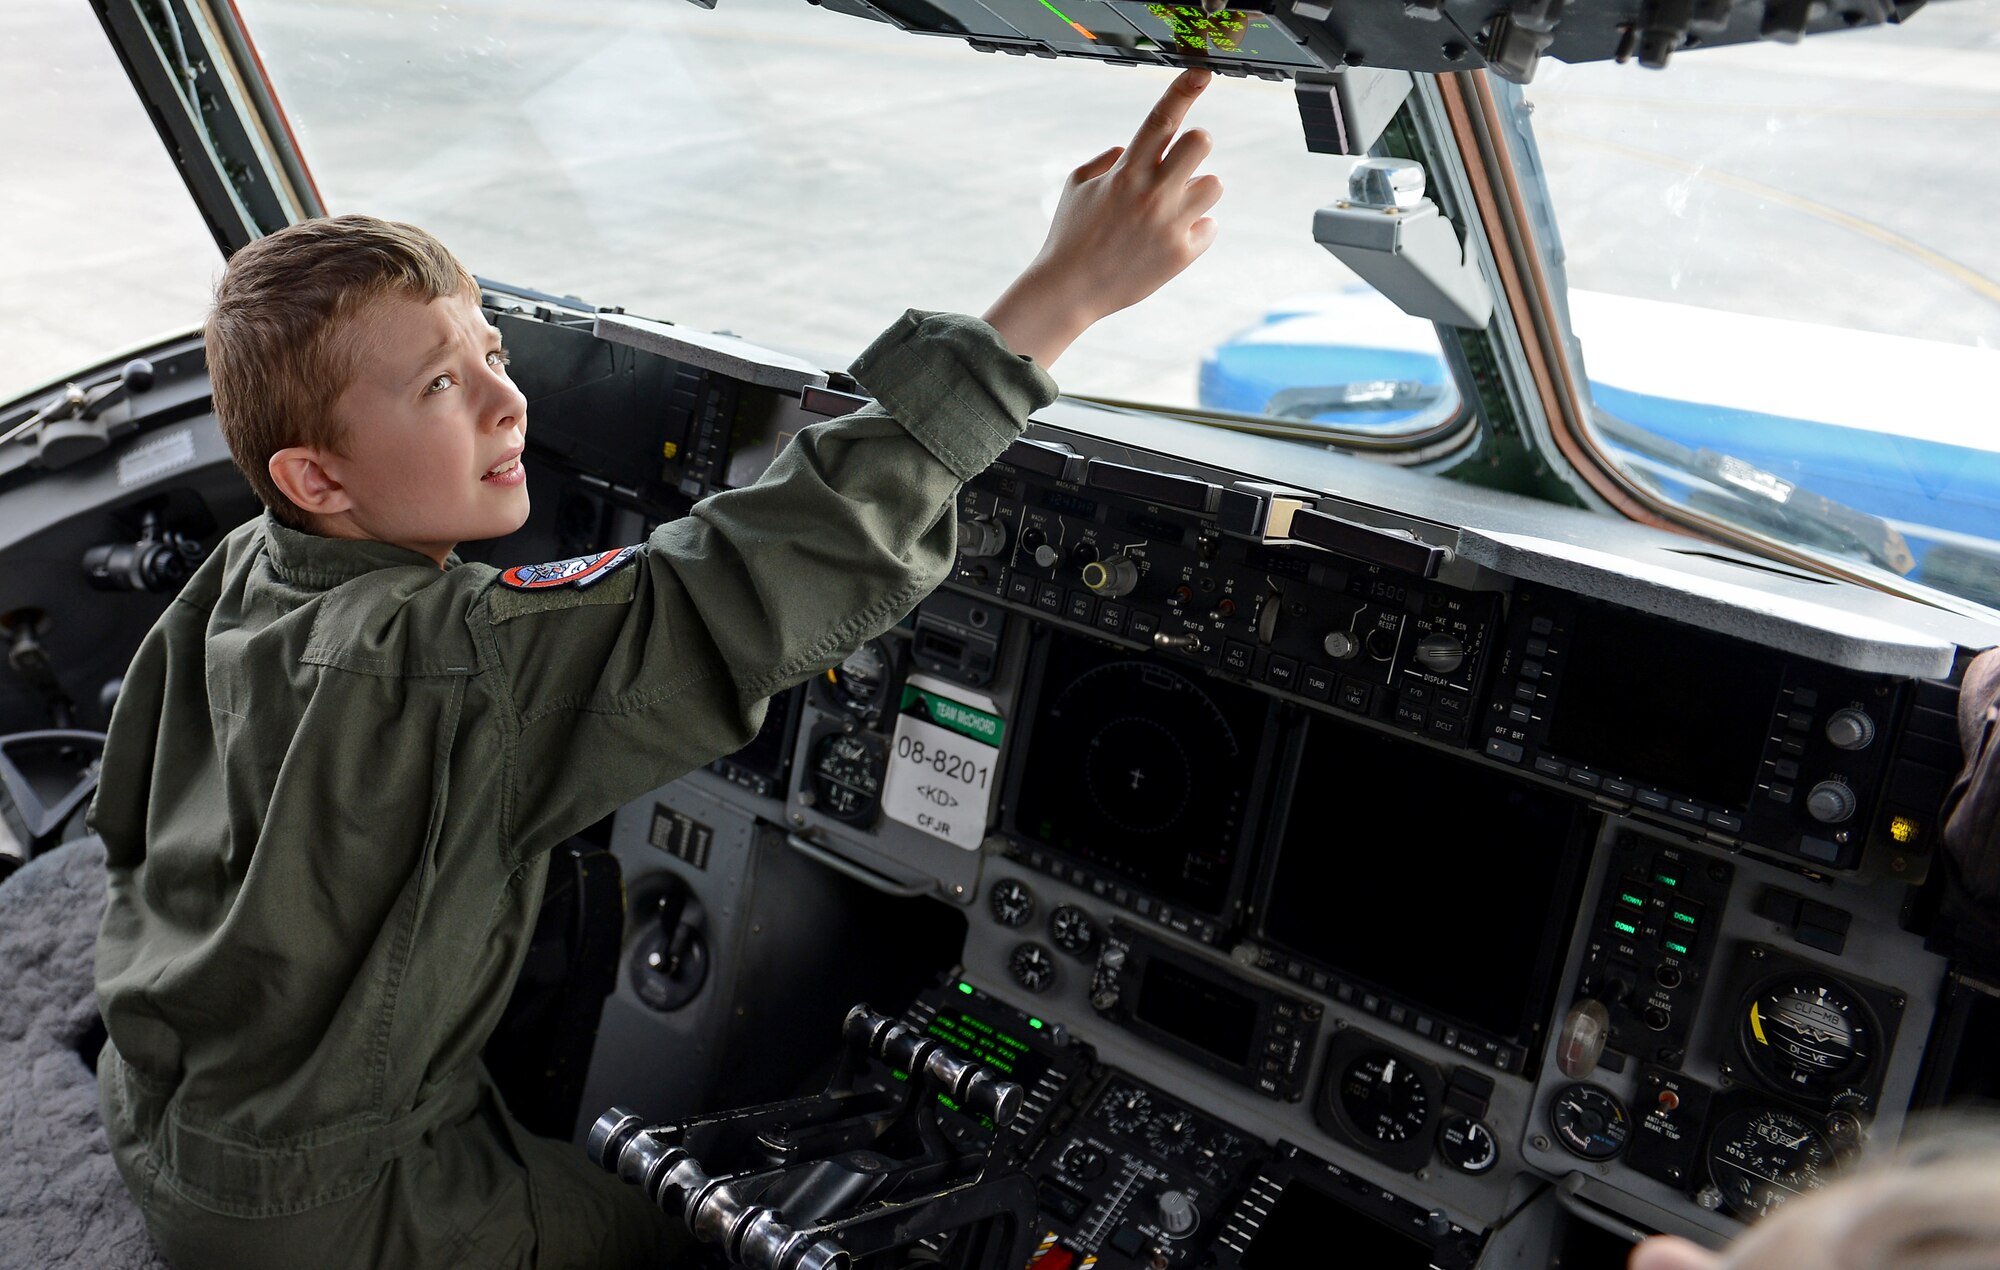 Ben Lambertson views the cockpit of a C-17 Globemaster III during his Pilot for a Day visit Oct. 7, 2016 at Joint Base Lewis-McChord, Wash. Ben and his family had the opportunity to see an actual C-17 Globemaster III and take photos in the cockpit before heading back to the squadron for cake and ice cream. (U.S. Air Force photo/Senior Airman Divine Cox)